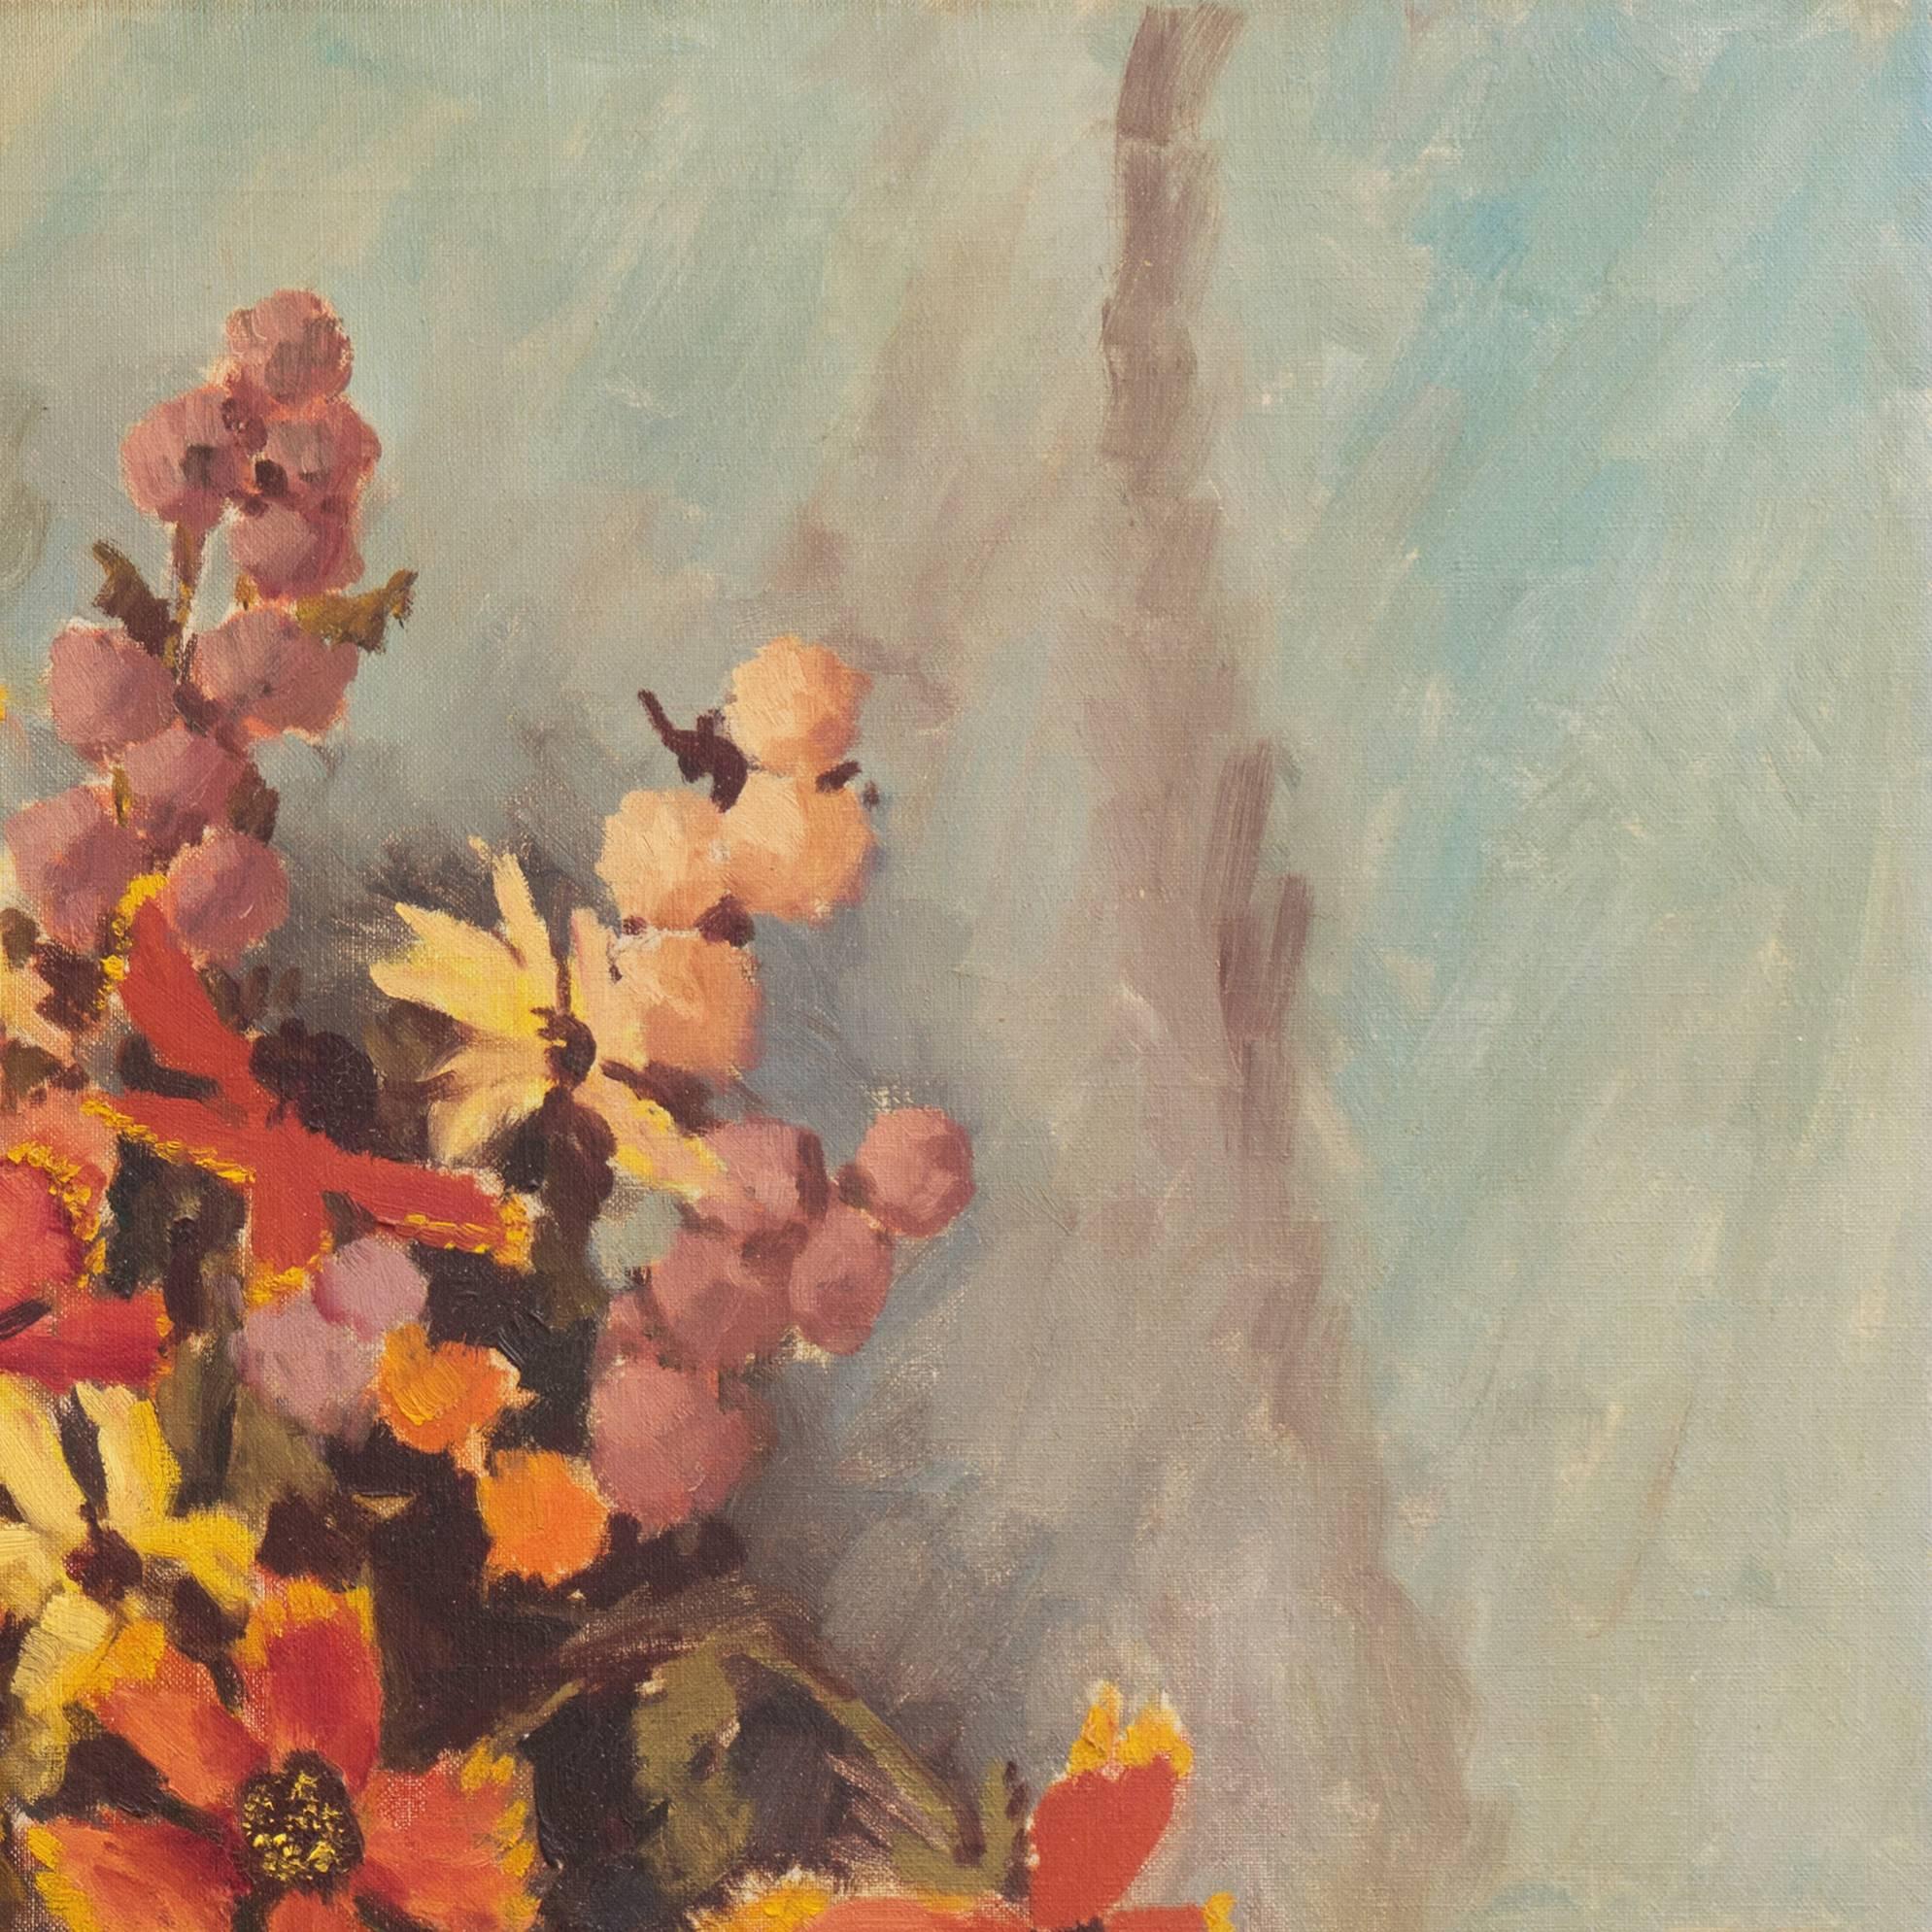 Signed lower right, 'S. L. Kramer' (American, 20th century) and painted circa 1960.

A mid-century, oil still-life showing a bouquet of spring flowers informally arranged in a glass vase, set upon a coral tablecloth and contrasted against a